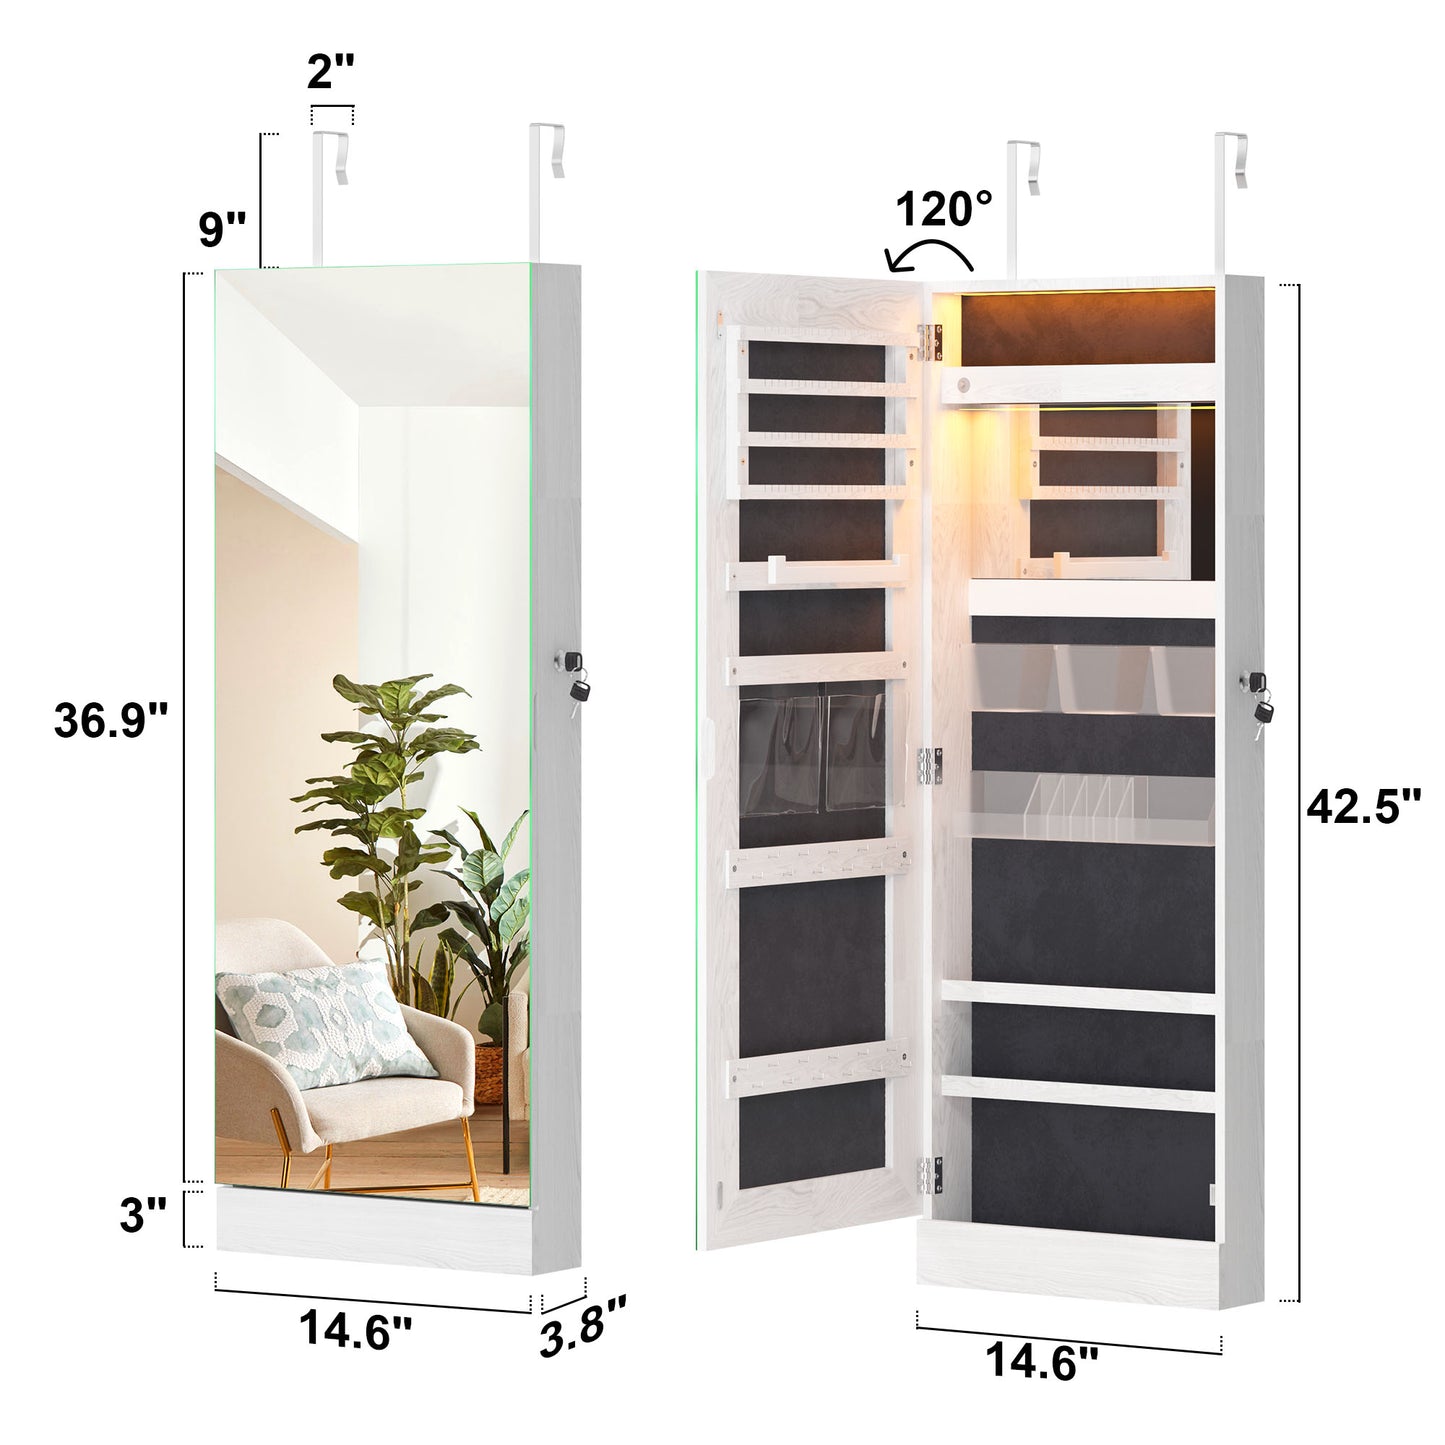 Soges Sturdy and Versatile LED Full-Length Mirror Cabinet for Makeup Storage,Hanging Full-length Mirror Cabinet, White